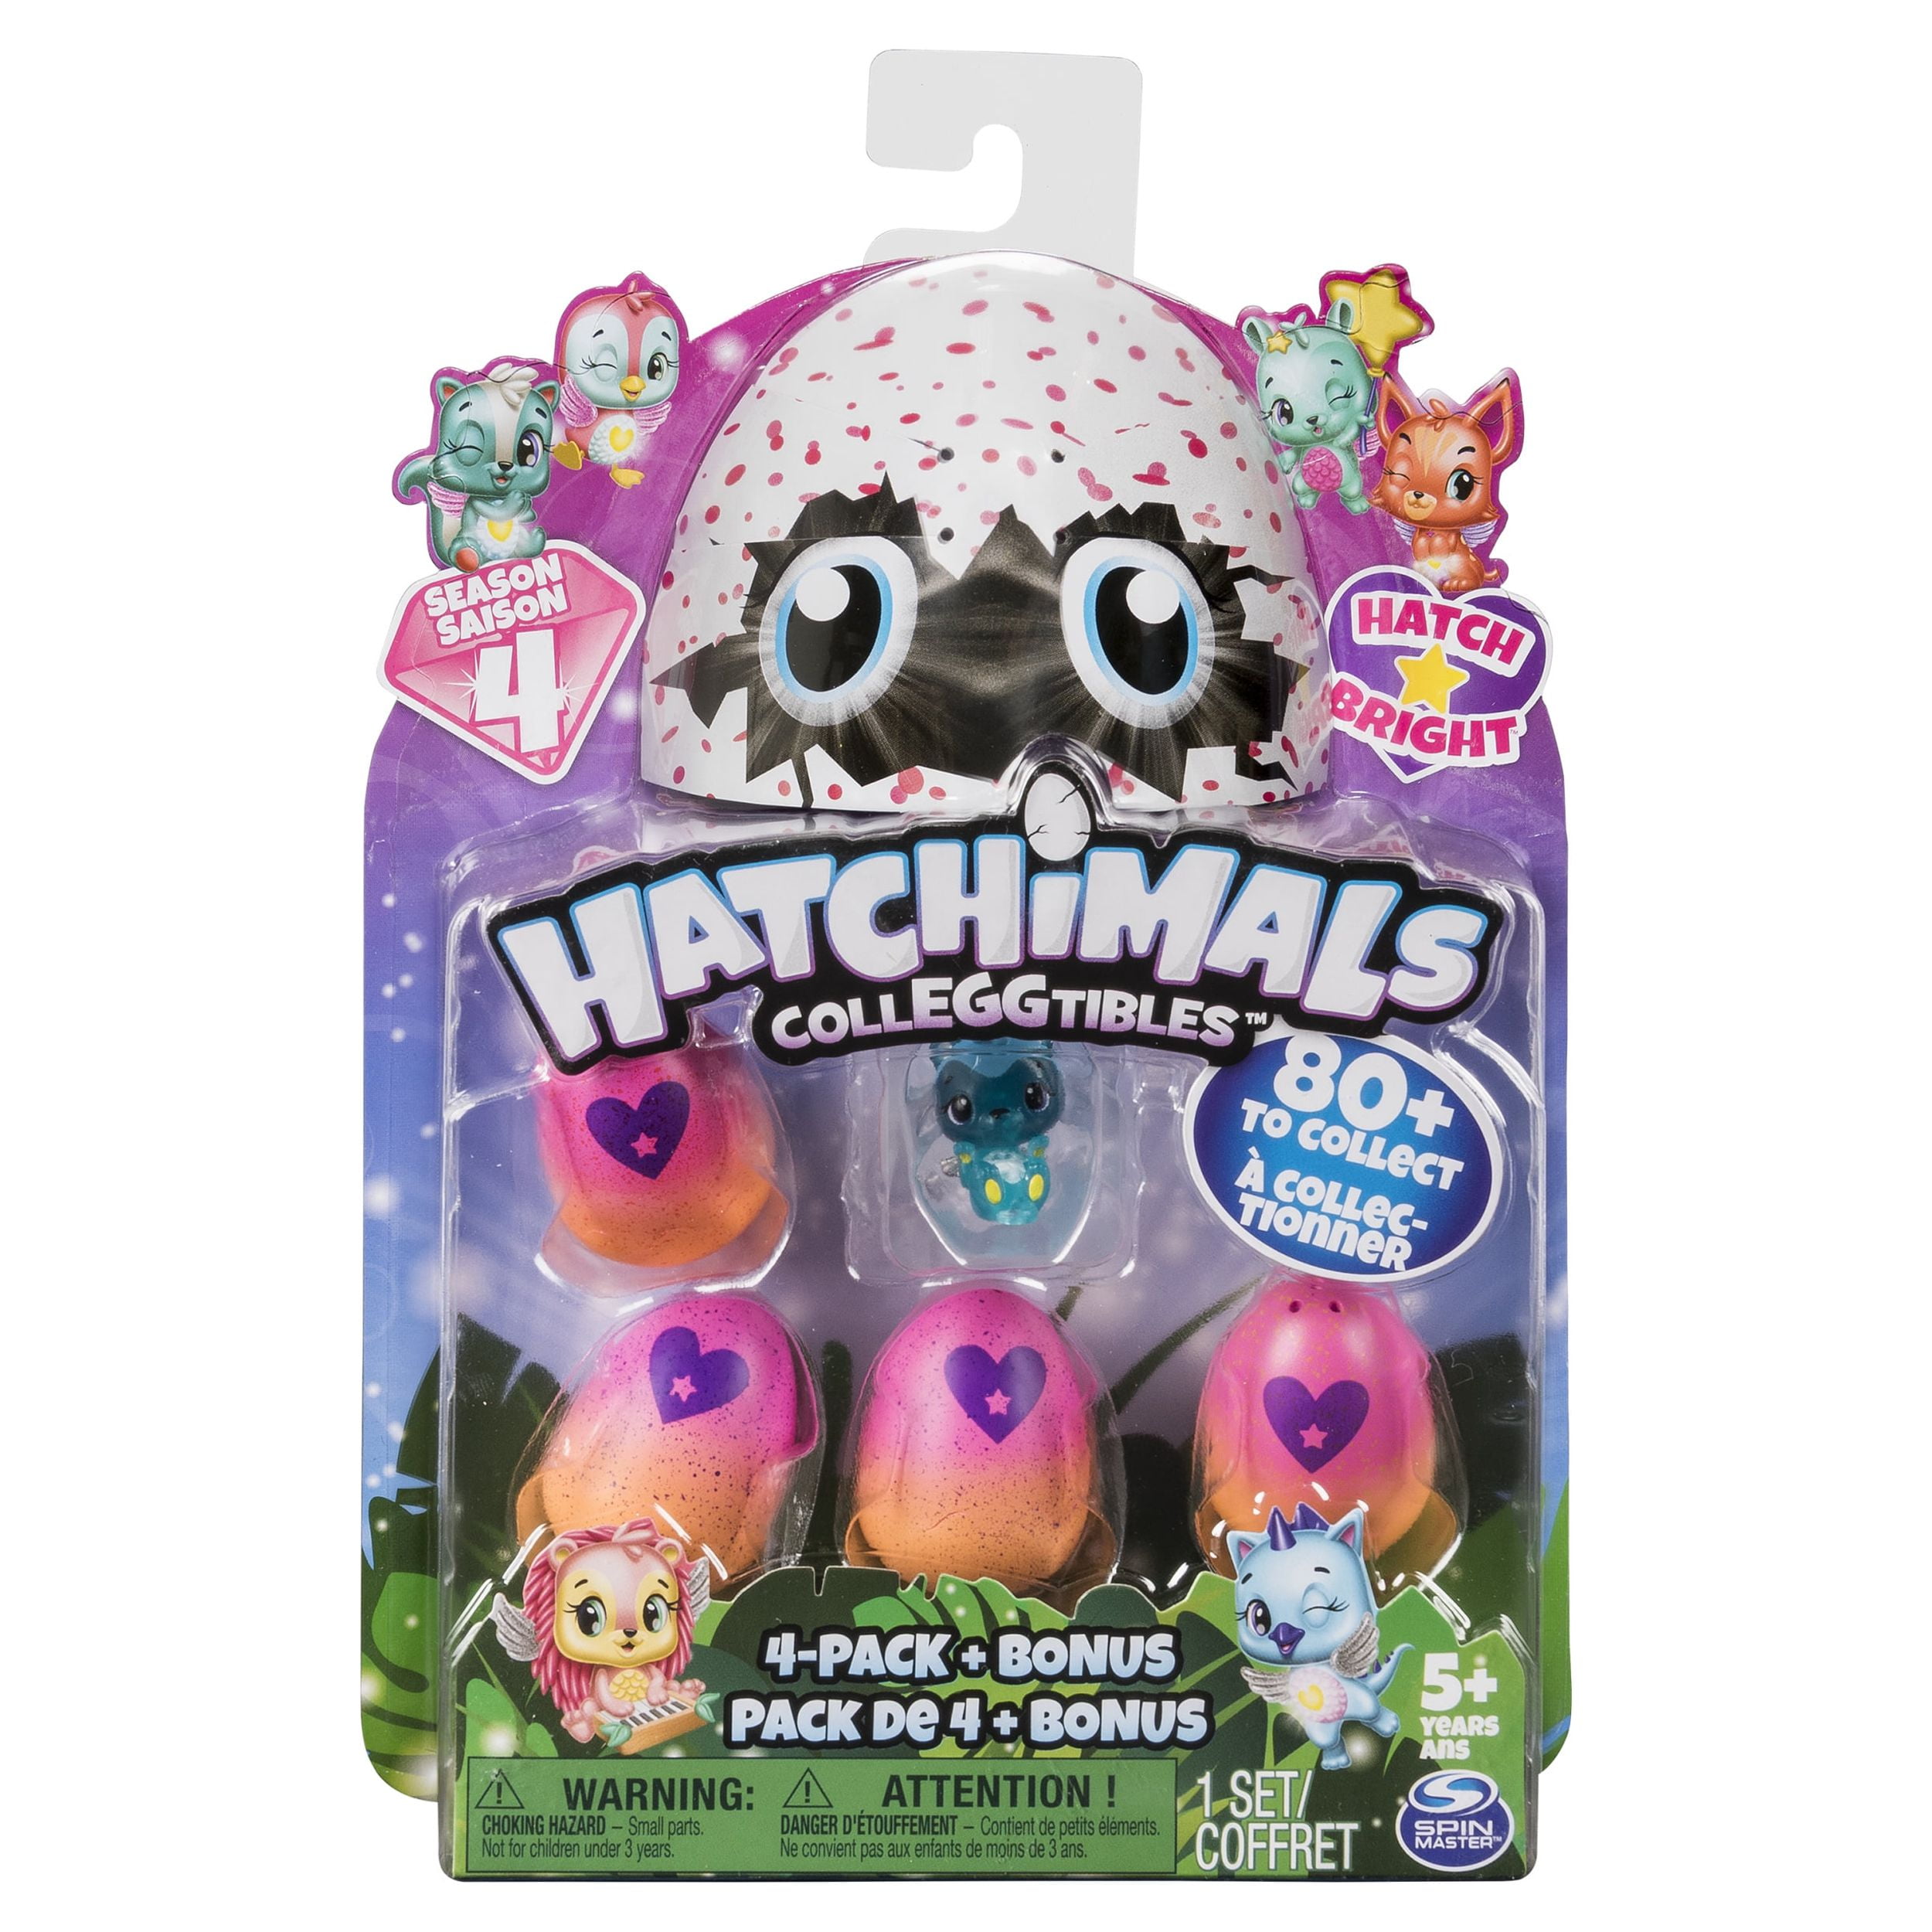 Hatchimals CollEGGtibles, Wilder Wings 12-Pack with Mix and Match Wings,  Kids Toys for Girls Ages 5 and up